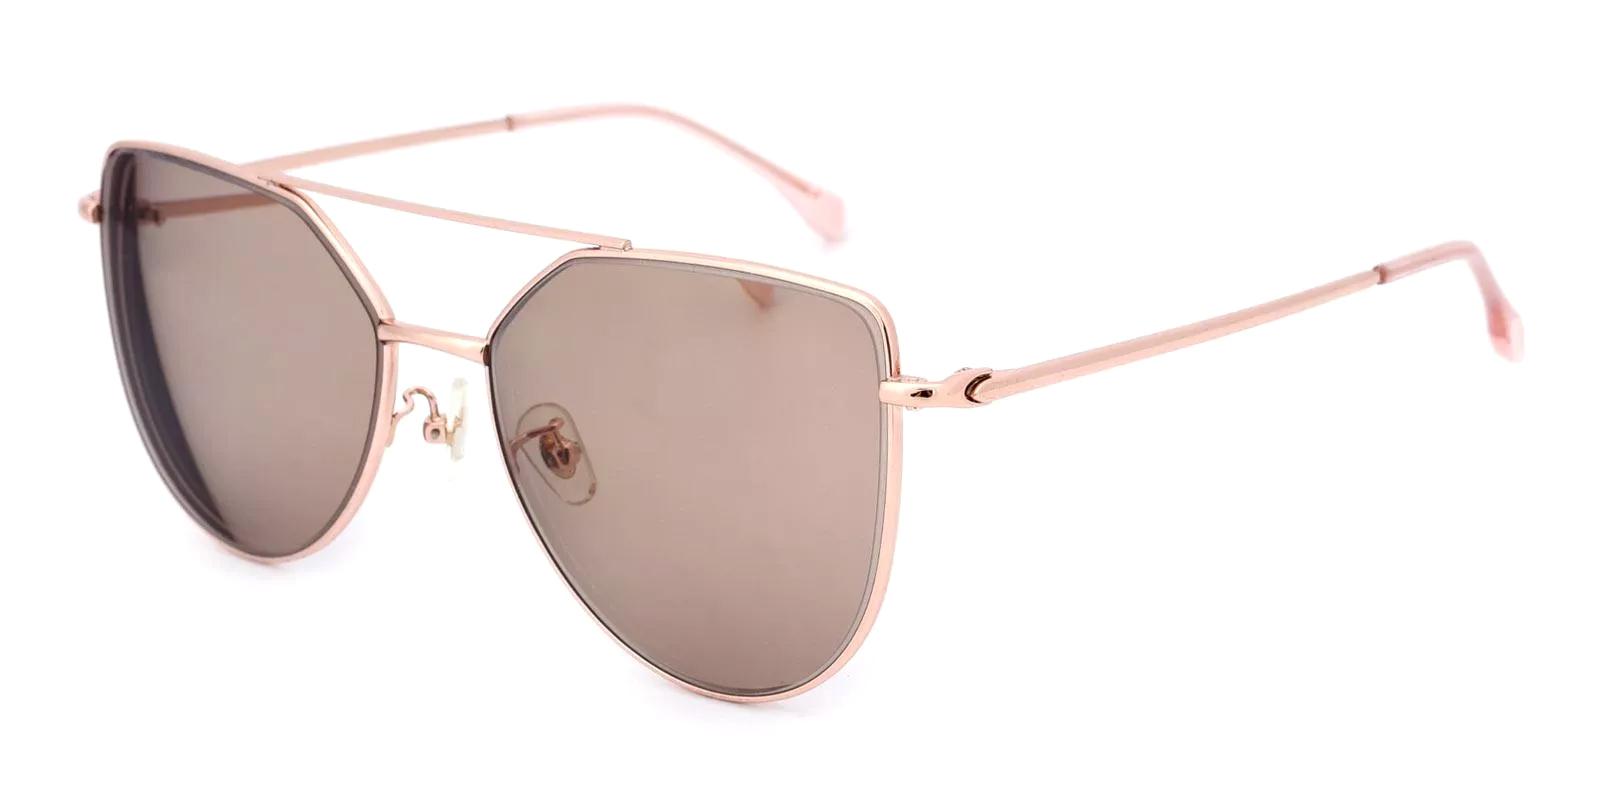 Shotier Rosegold Metal NosePads , Sunglasses Frames from ABBE Glasses